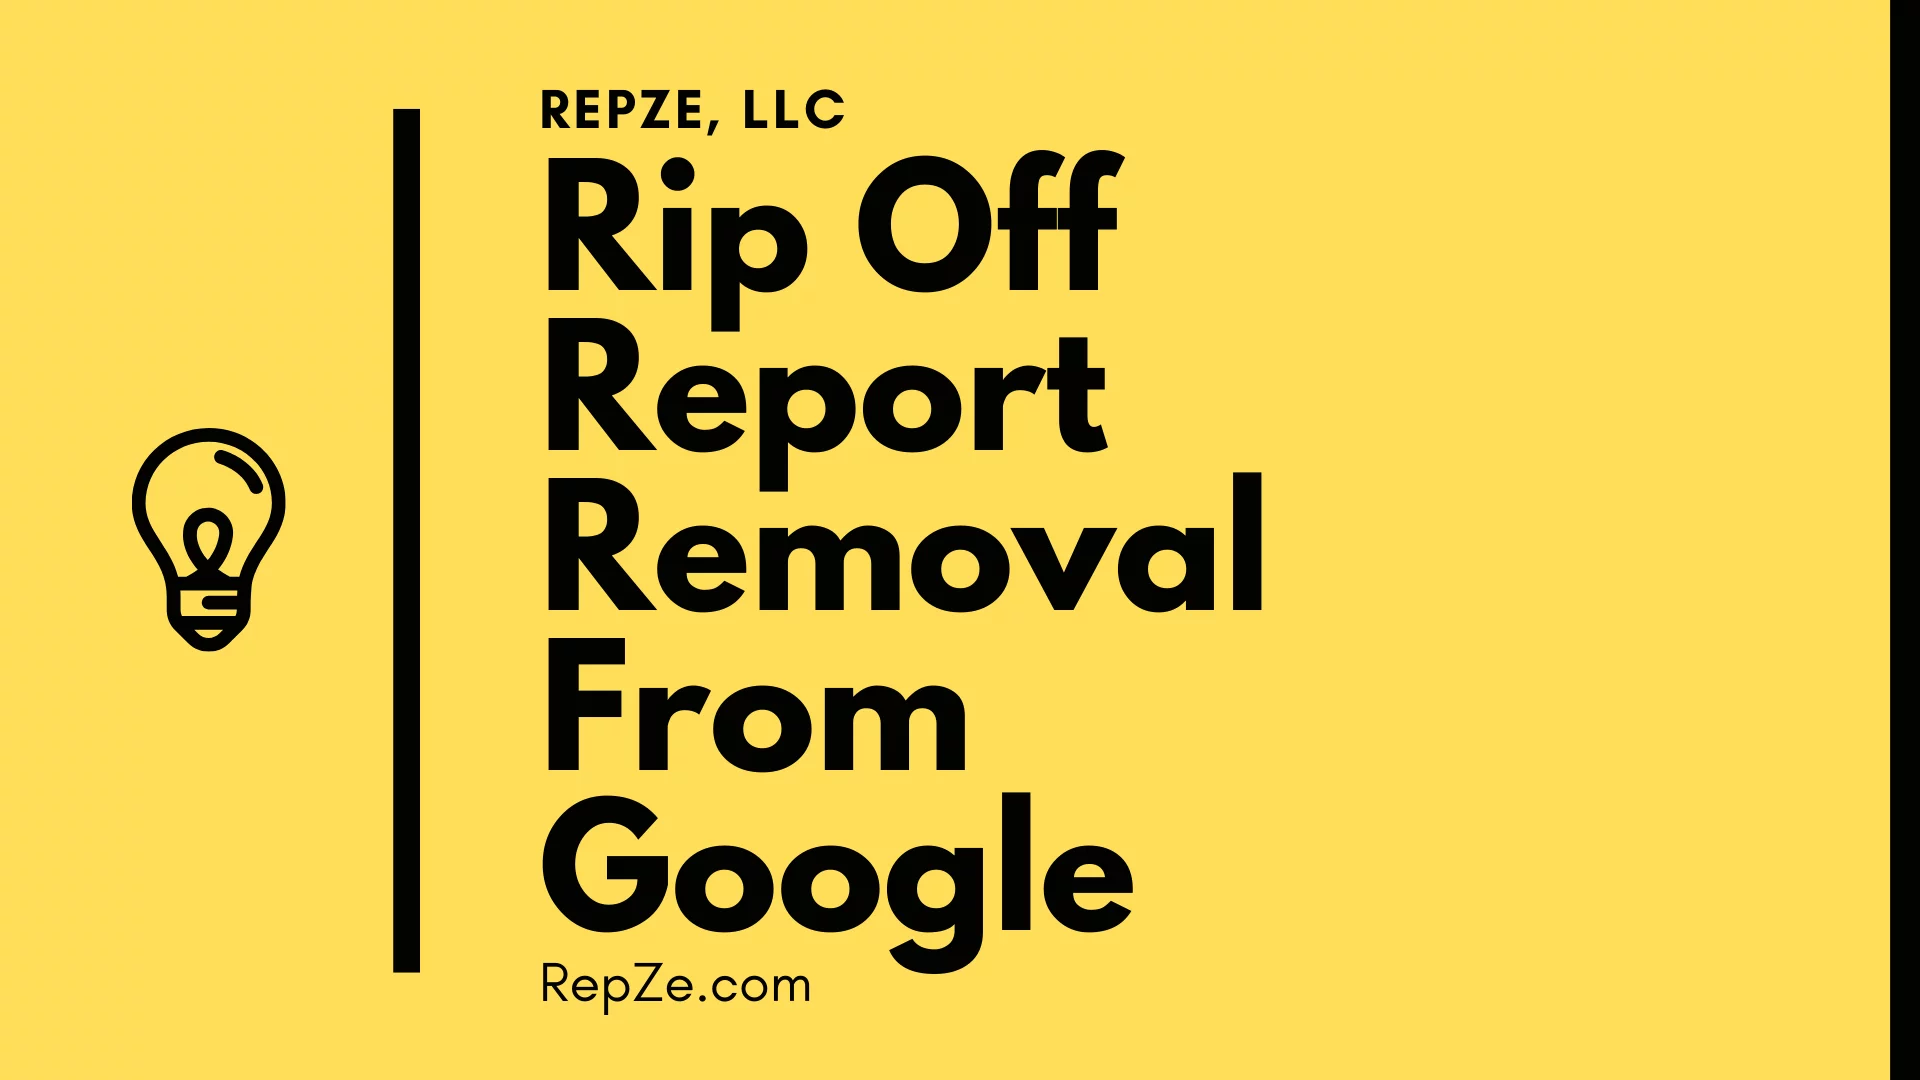 RipoffReport.com Removal From The Google and Other Major Search Engines